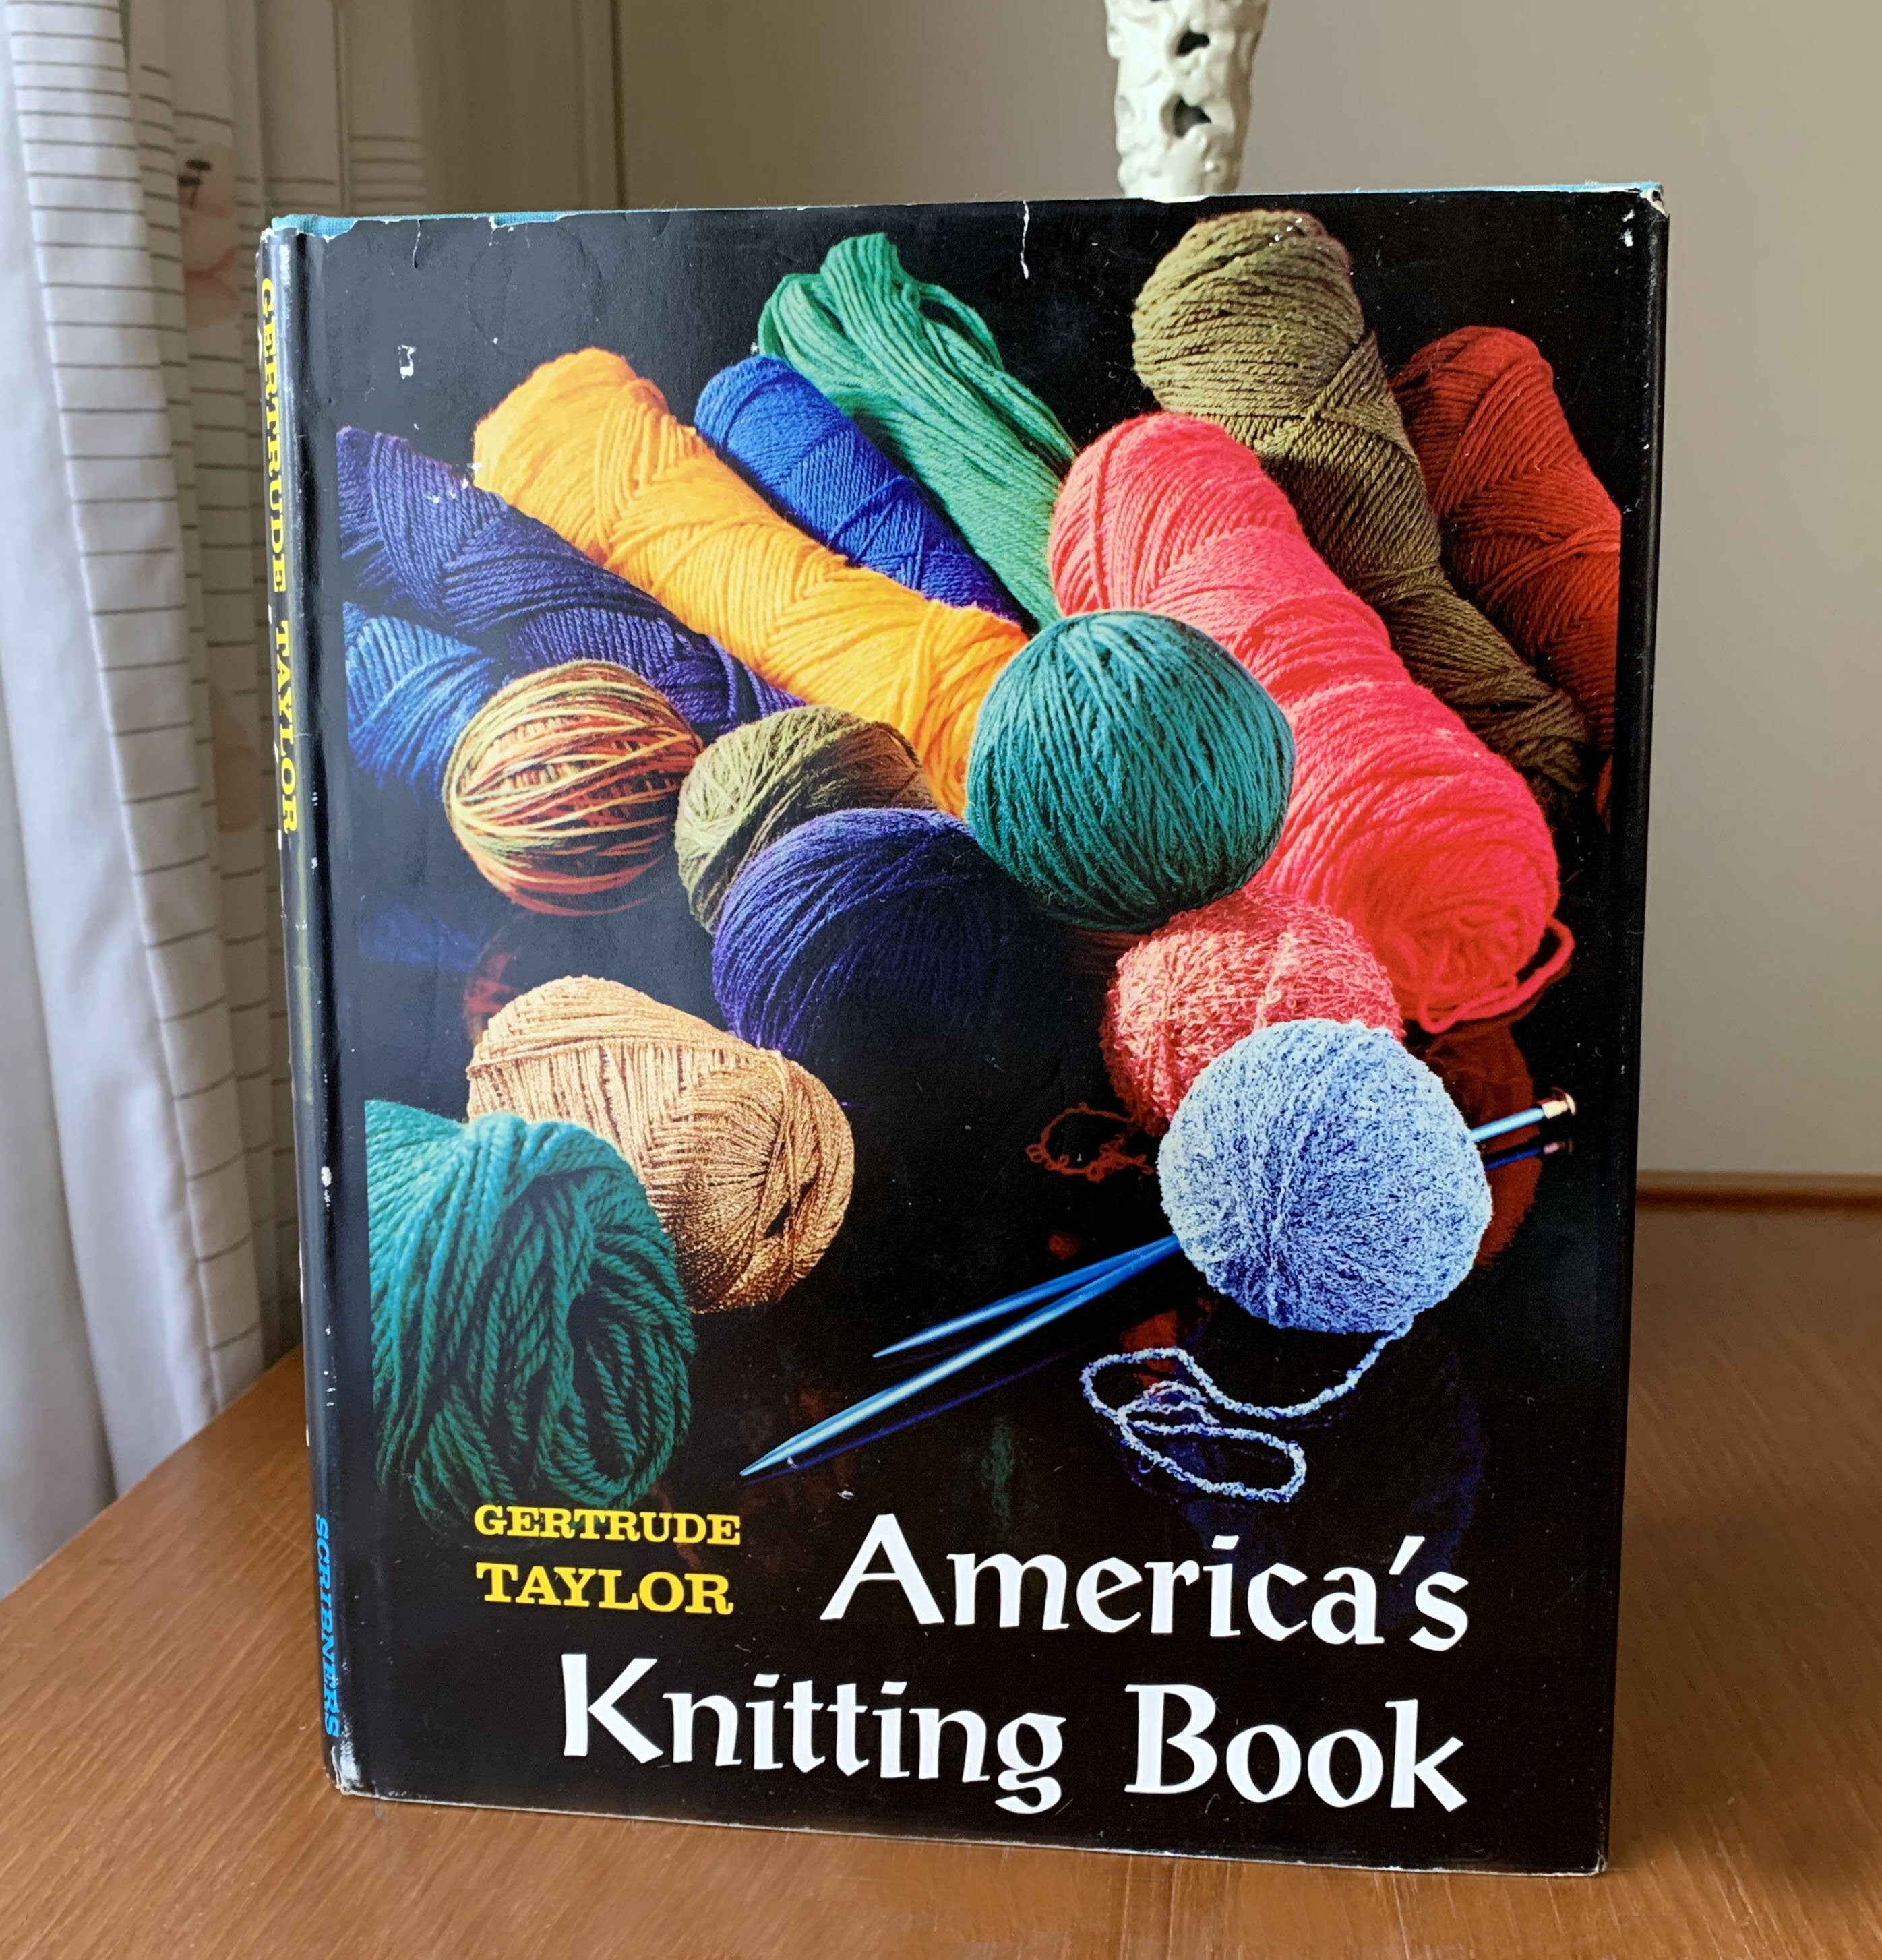 America's Knitting Book by Gertrude Taylor